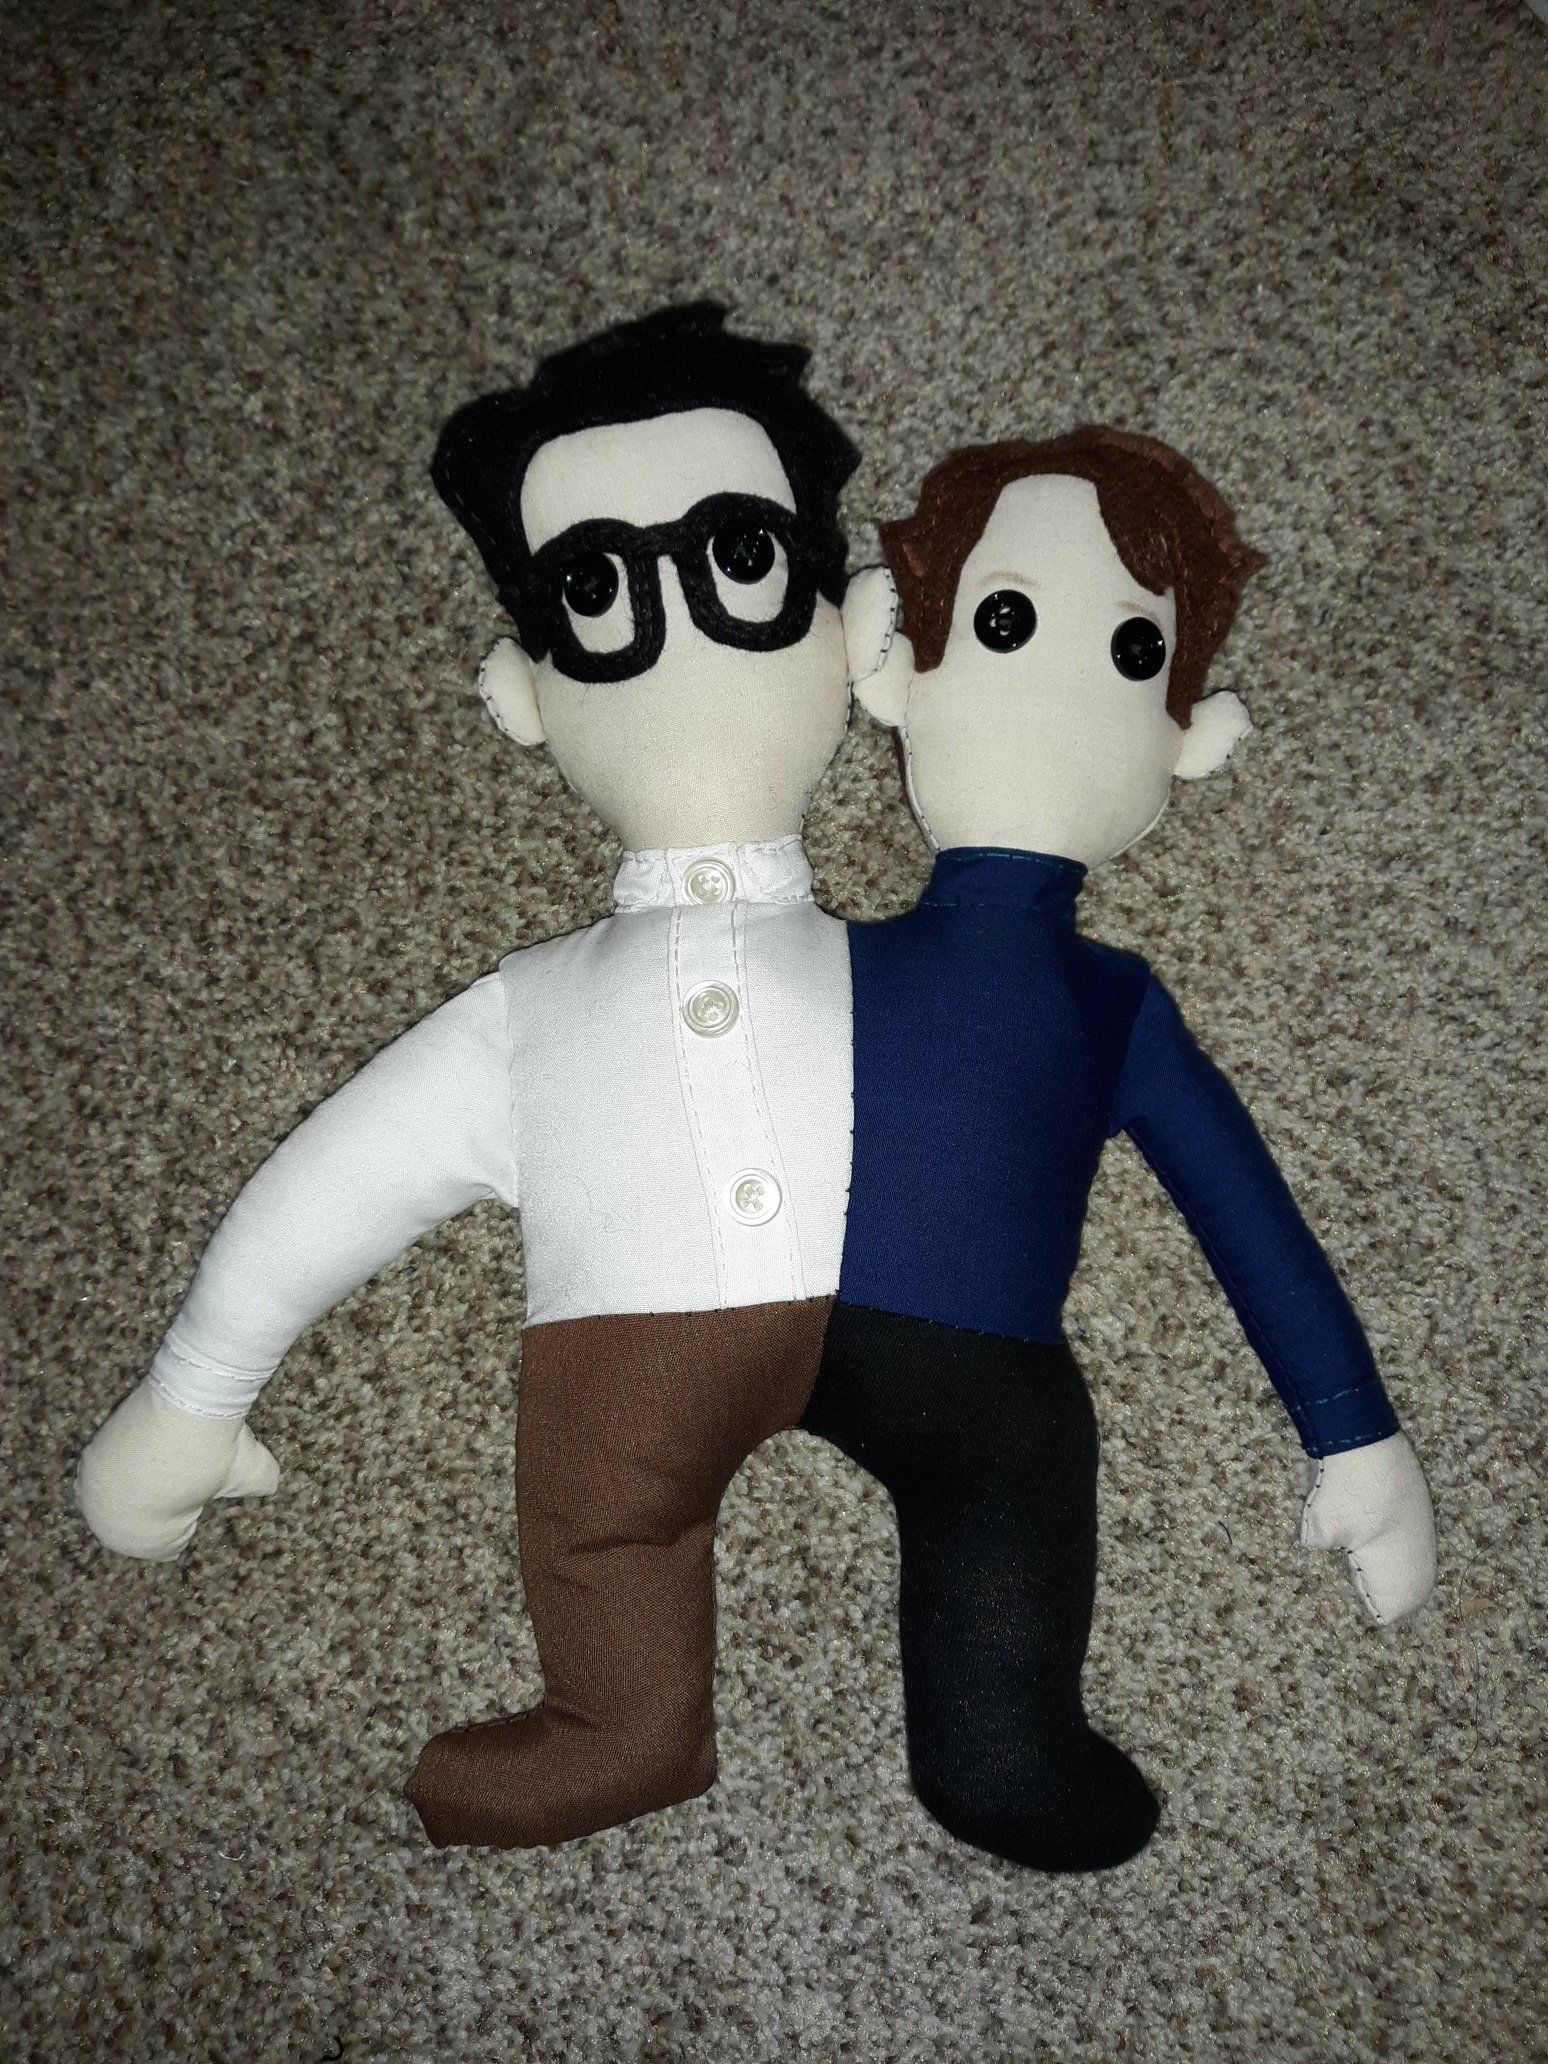 The two headed Johnster. It looks the same as the one above, but a bit more refined. Half of a young John Flansburgh has been sewn to half of a young John Linnell. Flansburgh is on the left and Linnell is on the right. Flansburgh is wearing a white button up shirt with brown pants. Linnell is wearing a dark blue turtleneck with black pants. They both have black button eyes. Flansburgh is wearing black glasses.